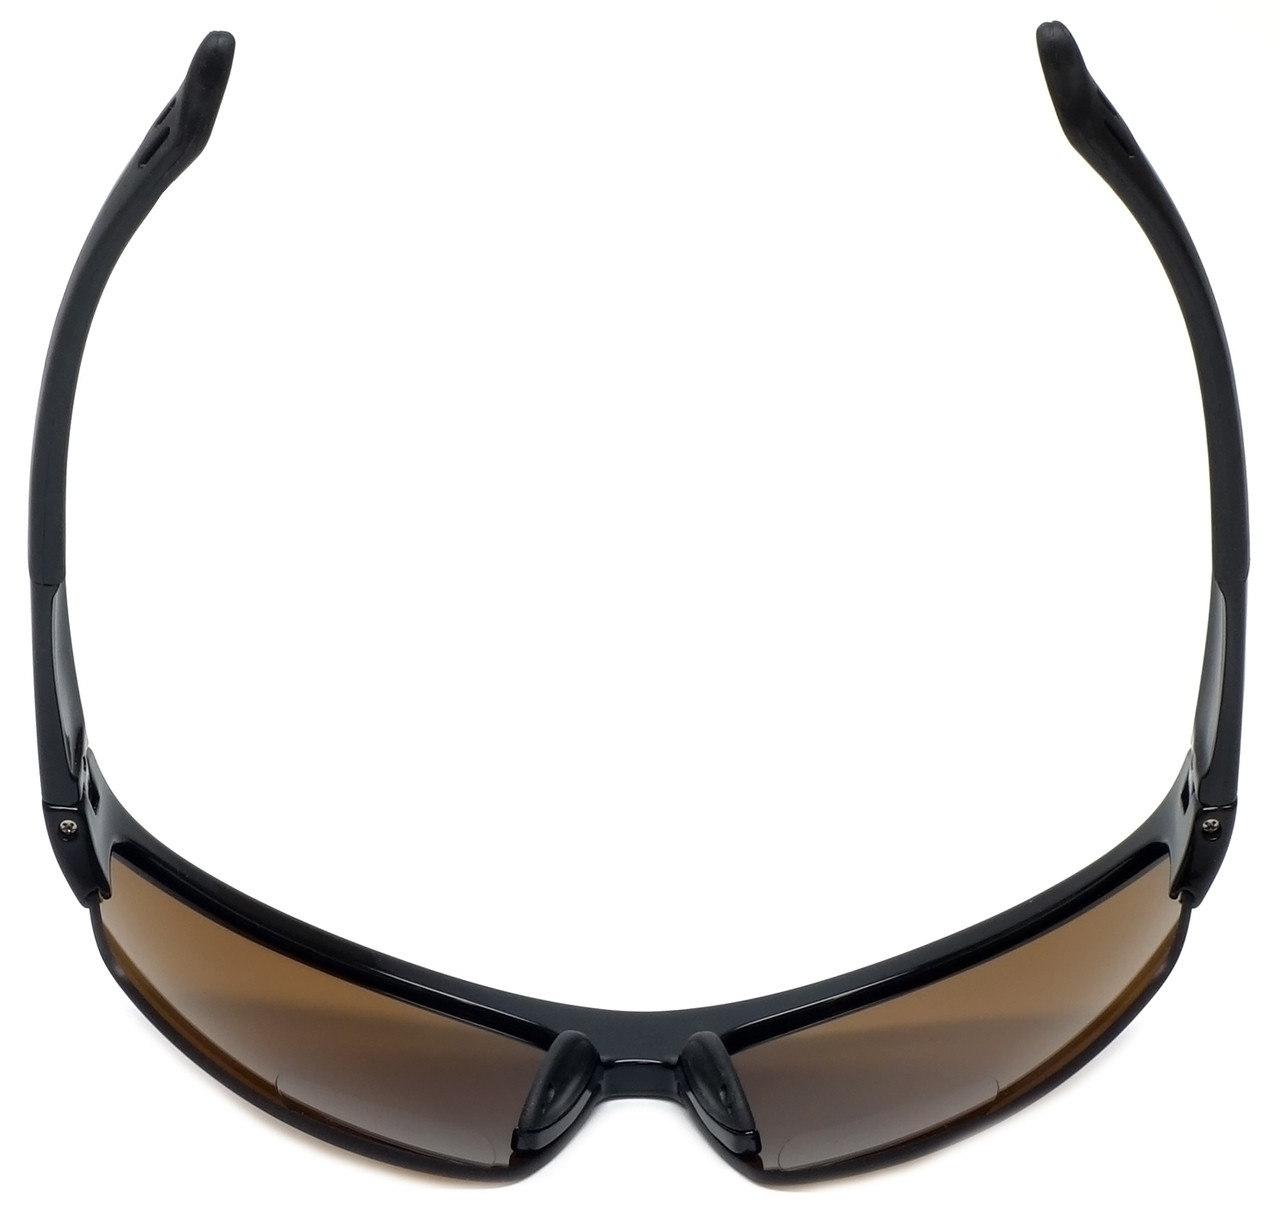 Calabria Sport Polarized Bi-Focal Safety Glasses UV Protection in Black-Amber